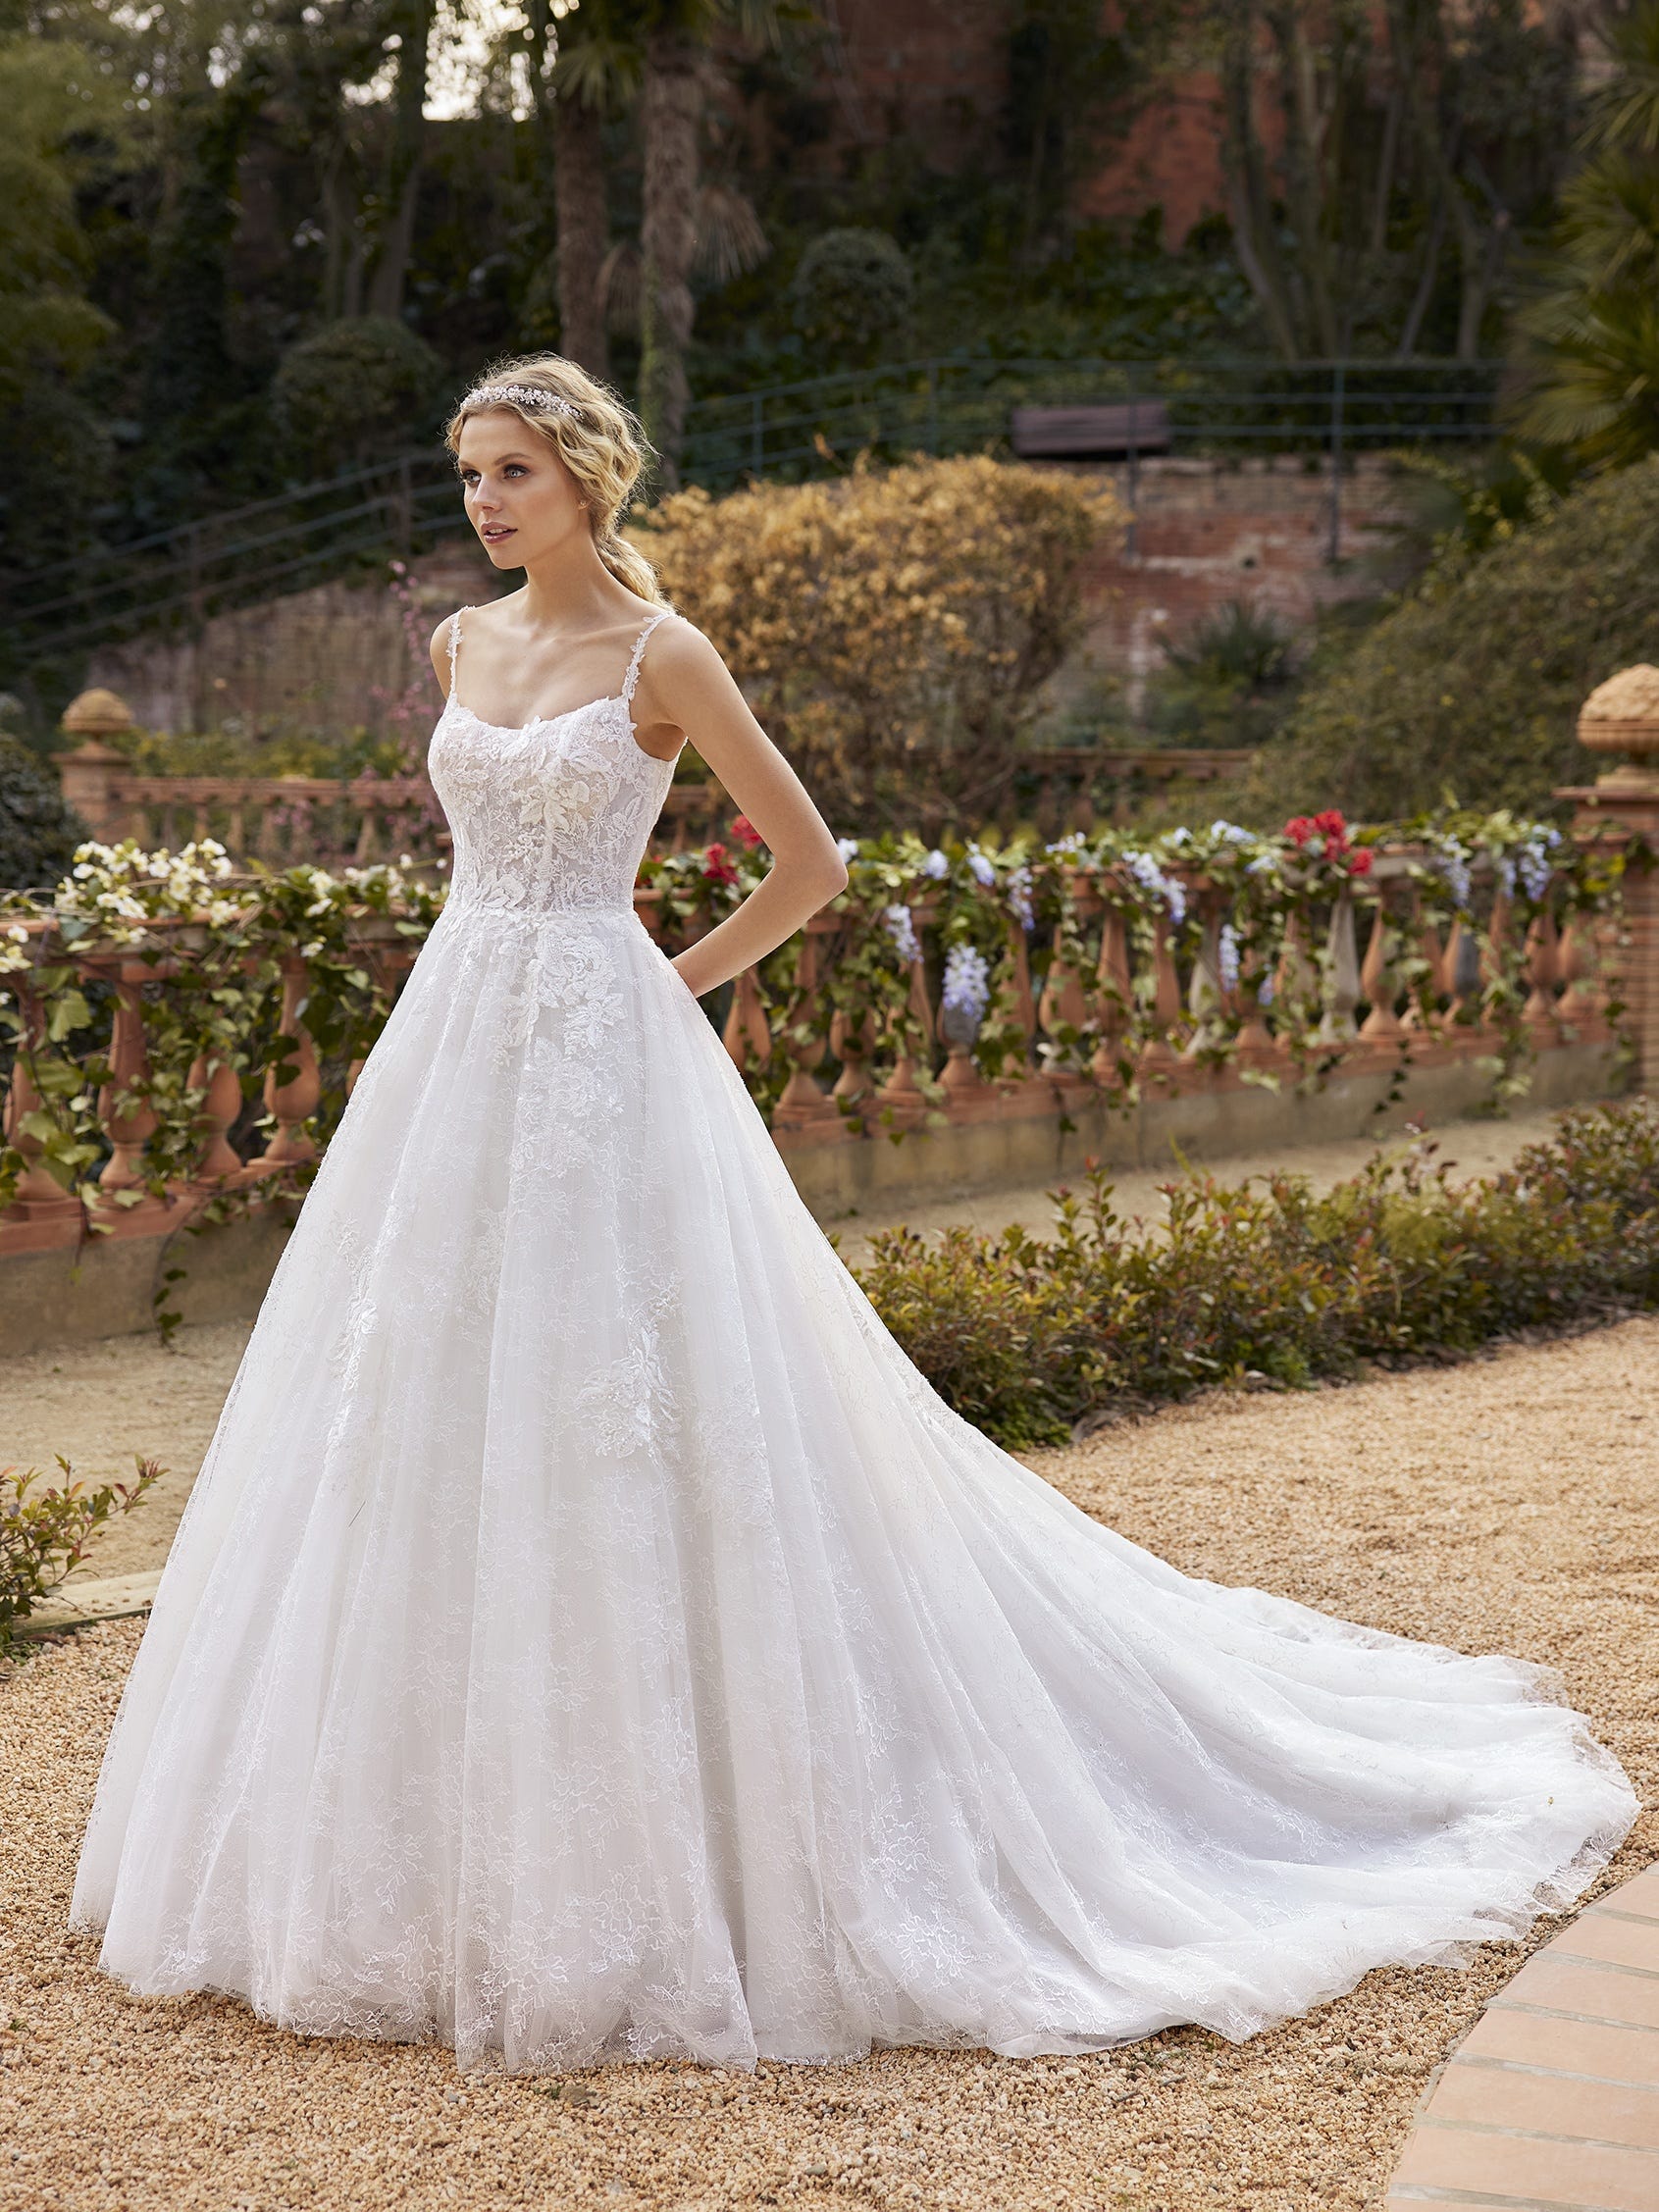 LACE AND TULLE A-LINE WEDDING DRESS WITH SQUARE NECKLINE